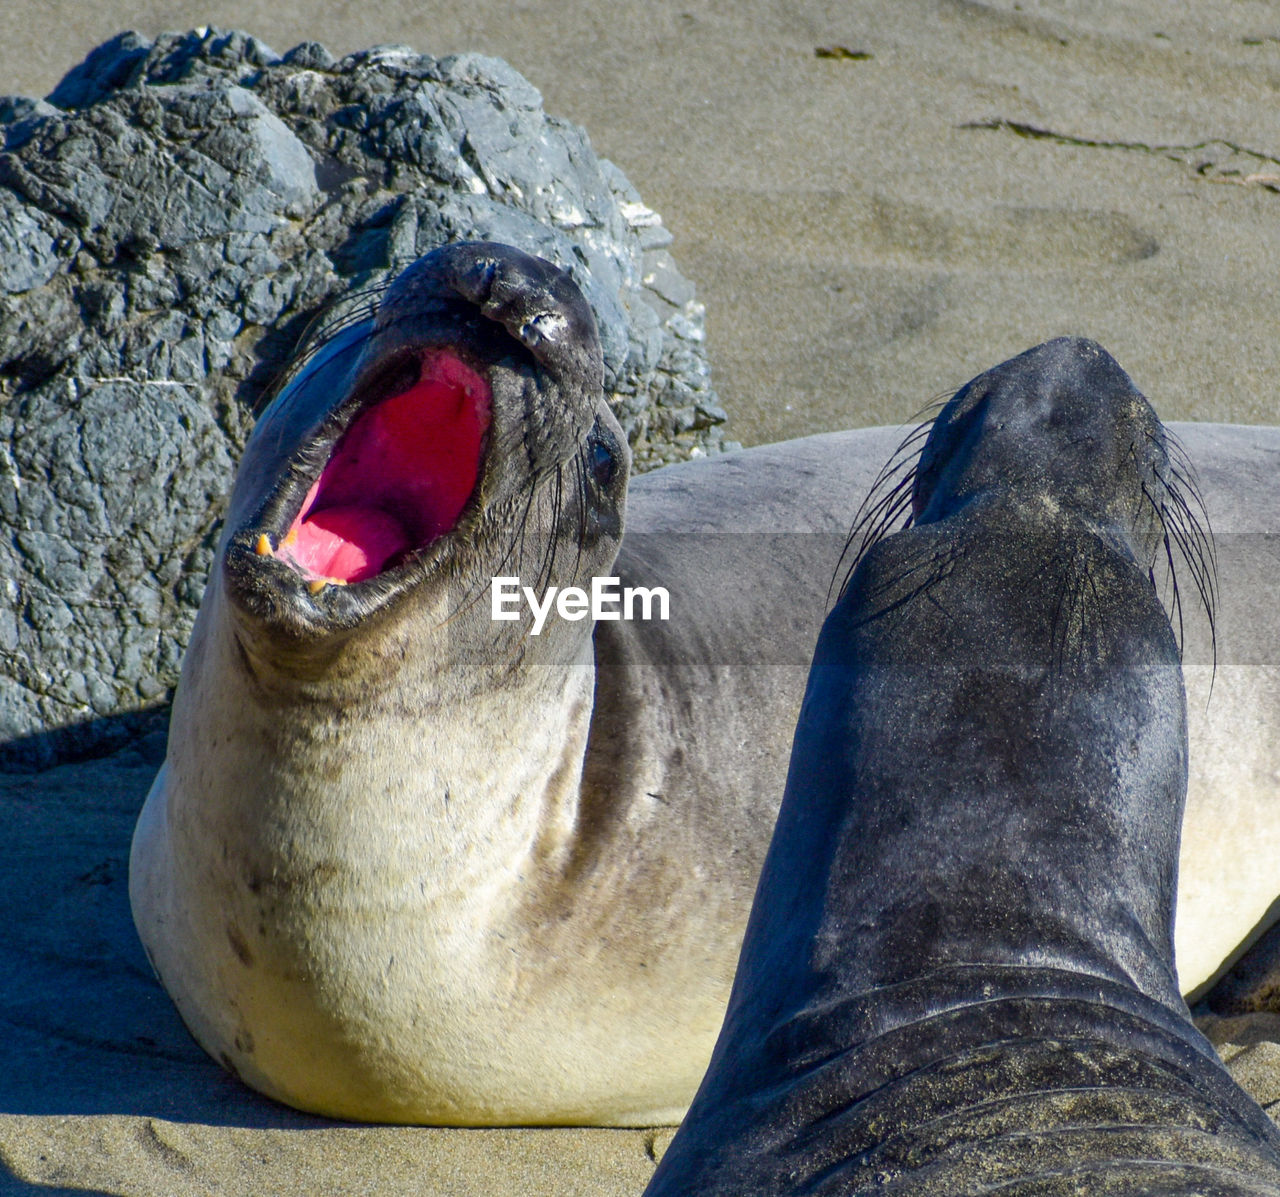 Elephant seals fighting on beach looking funny with pink mouth open 